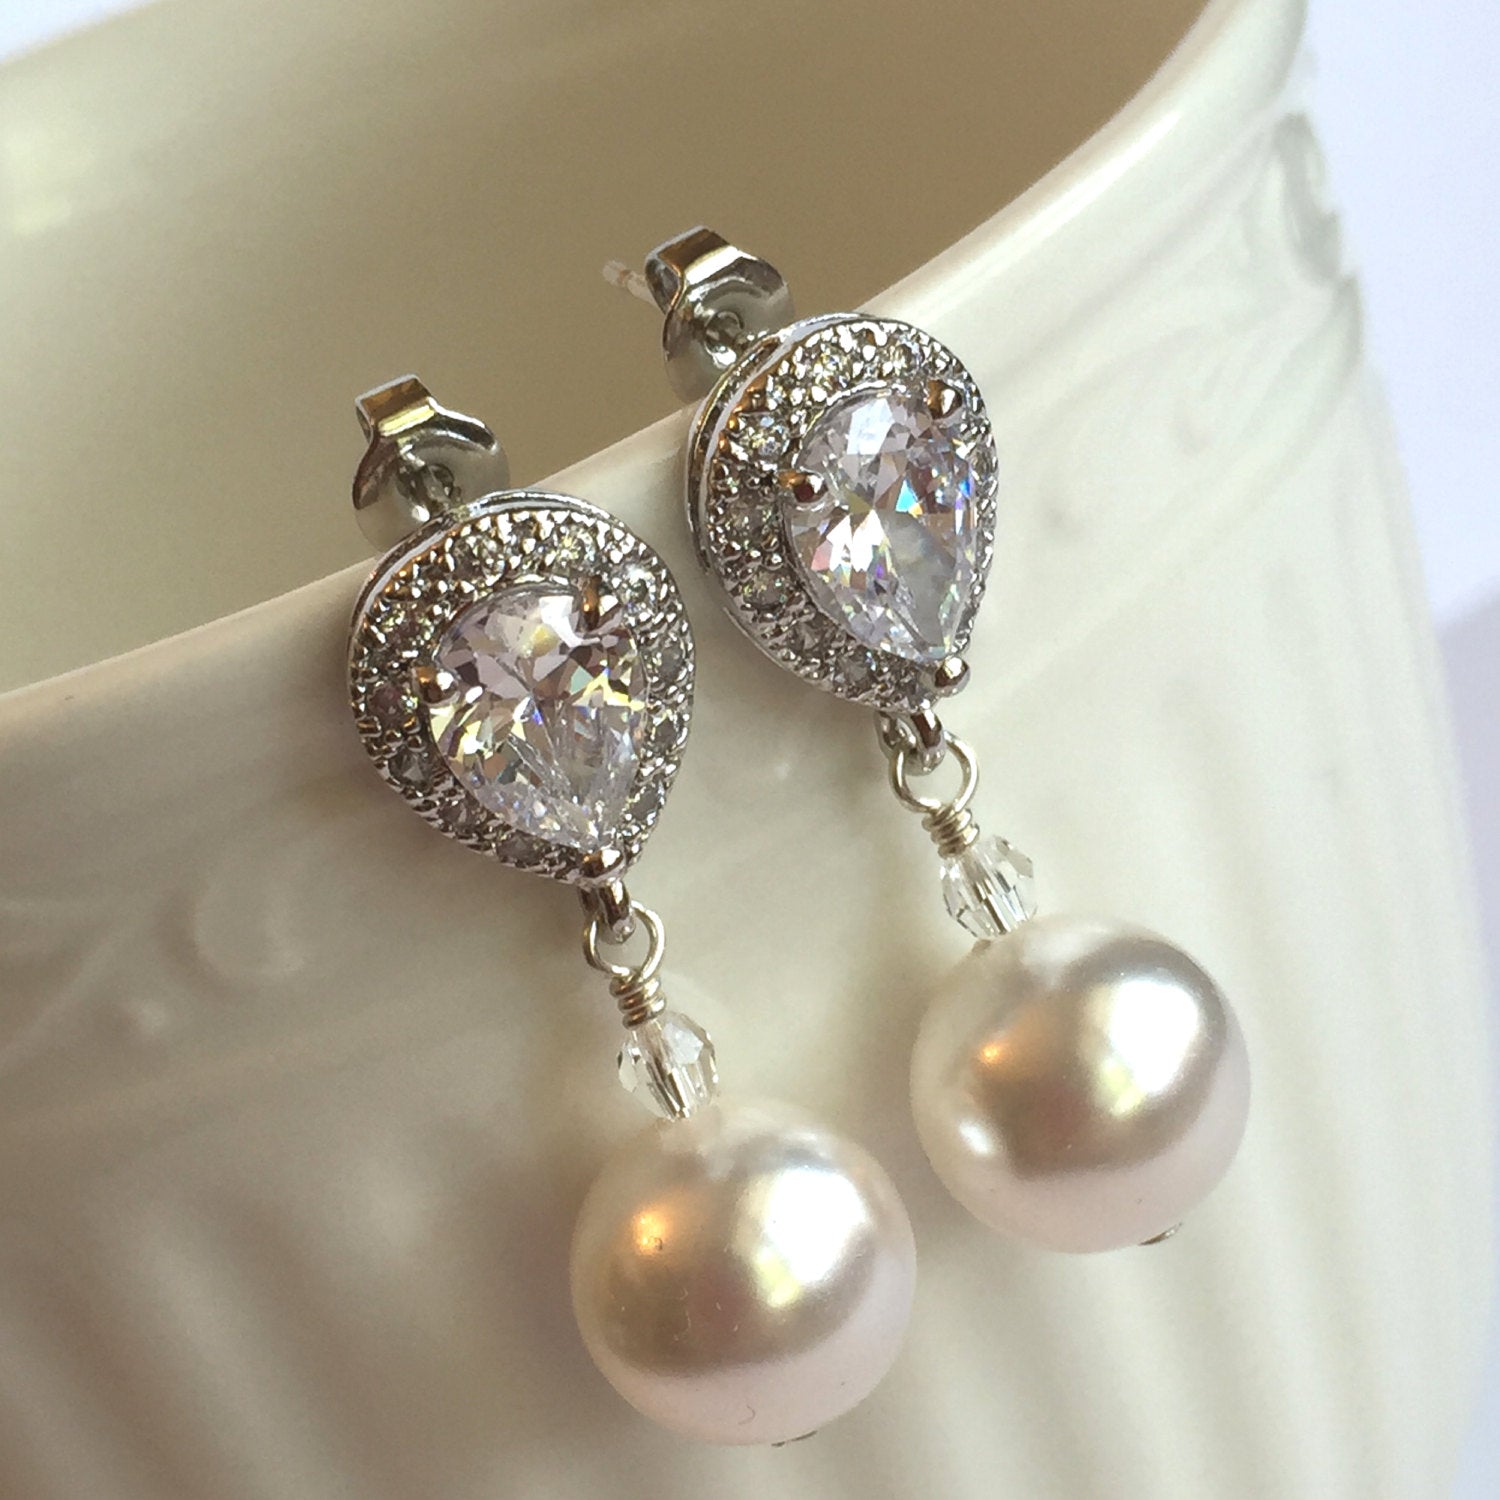 close up of White pearl drop earrings with a cubic zirconia stud